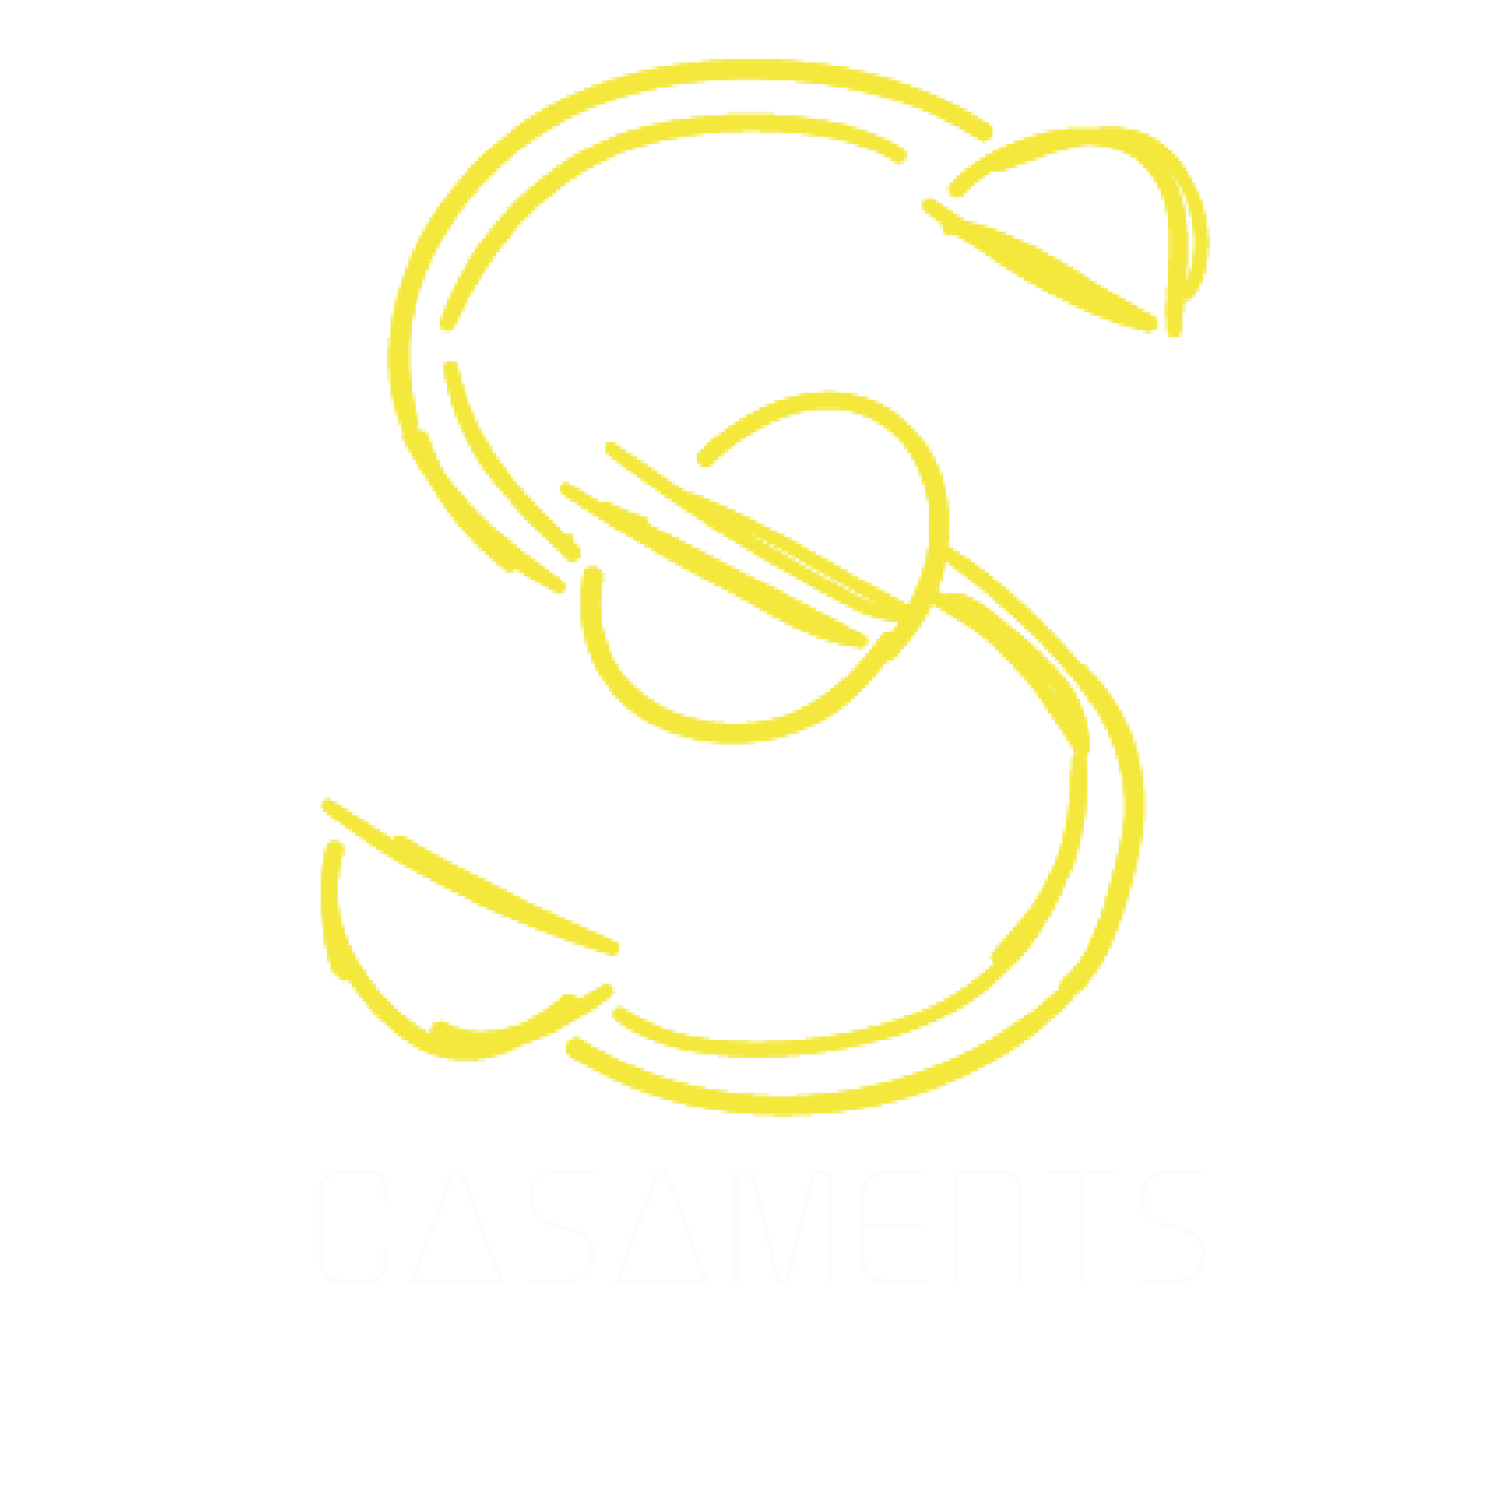 Stage casaments